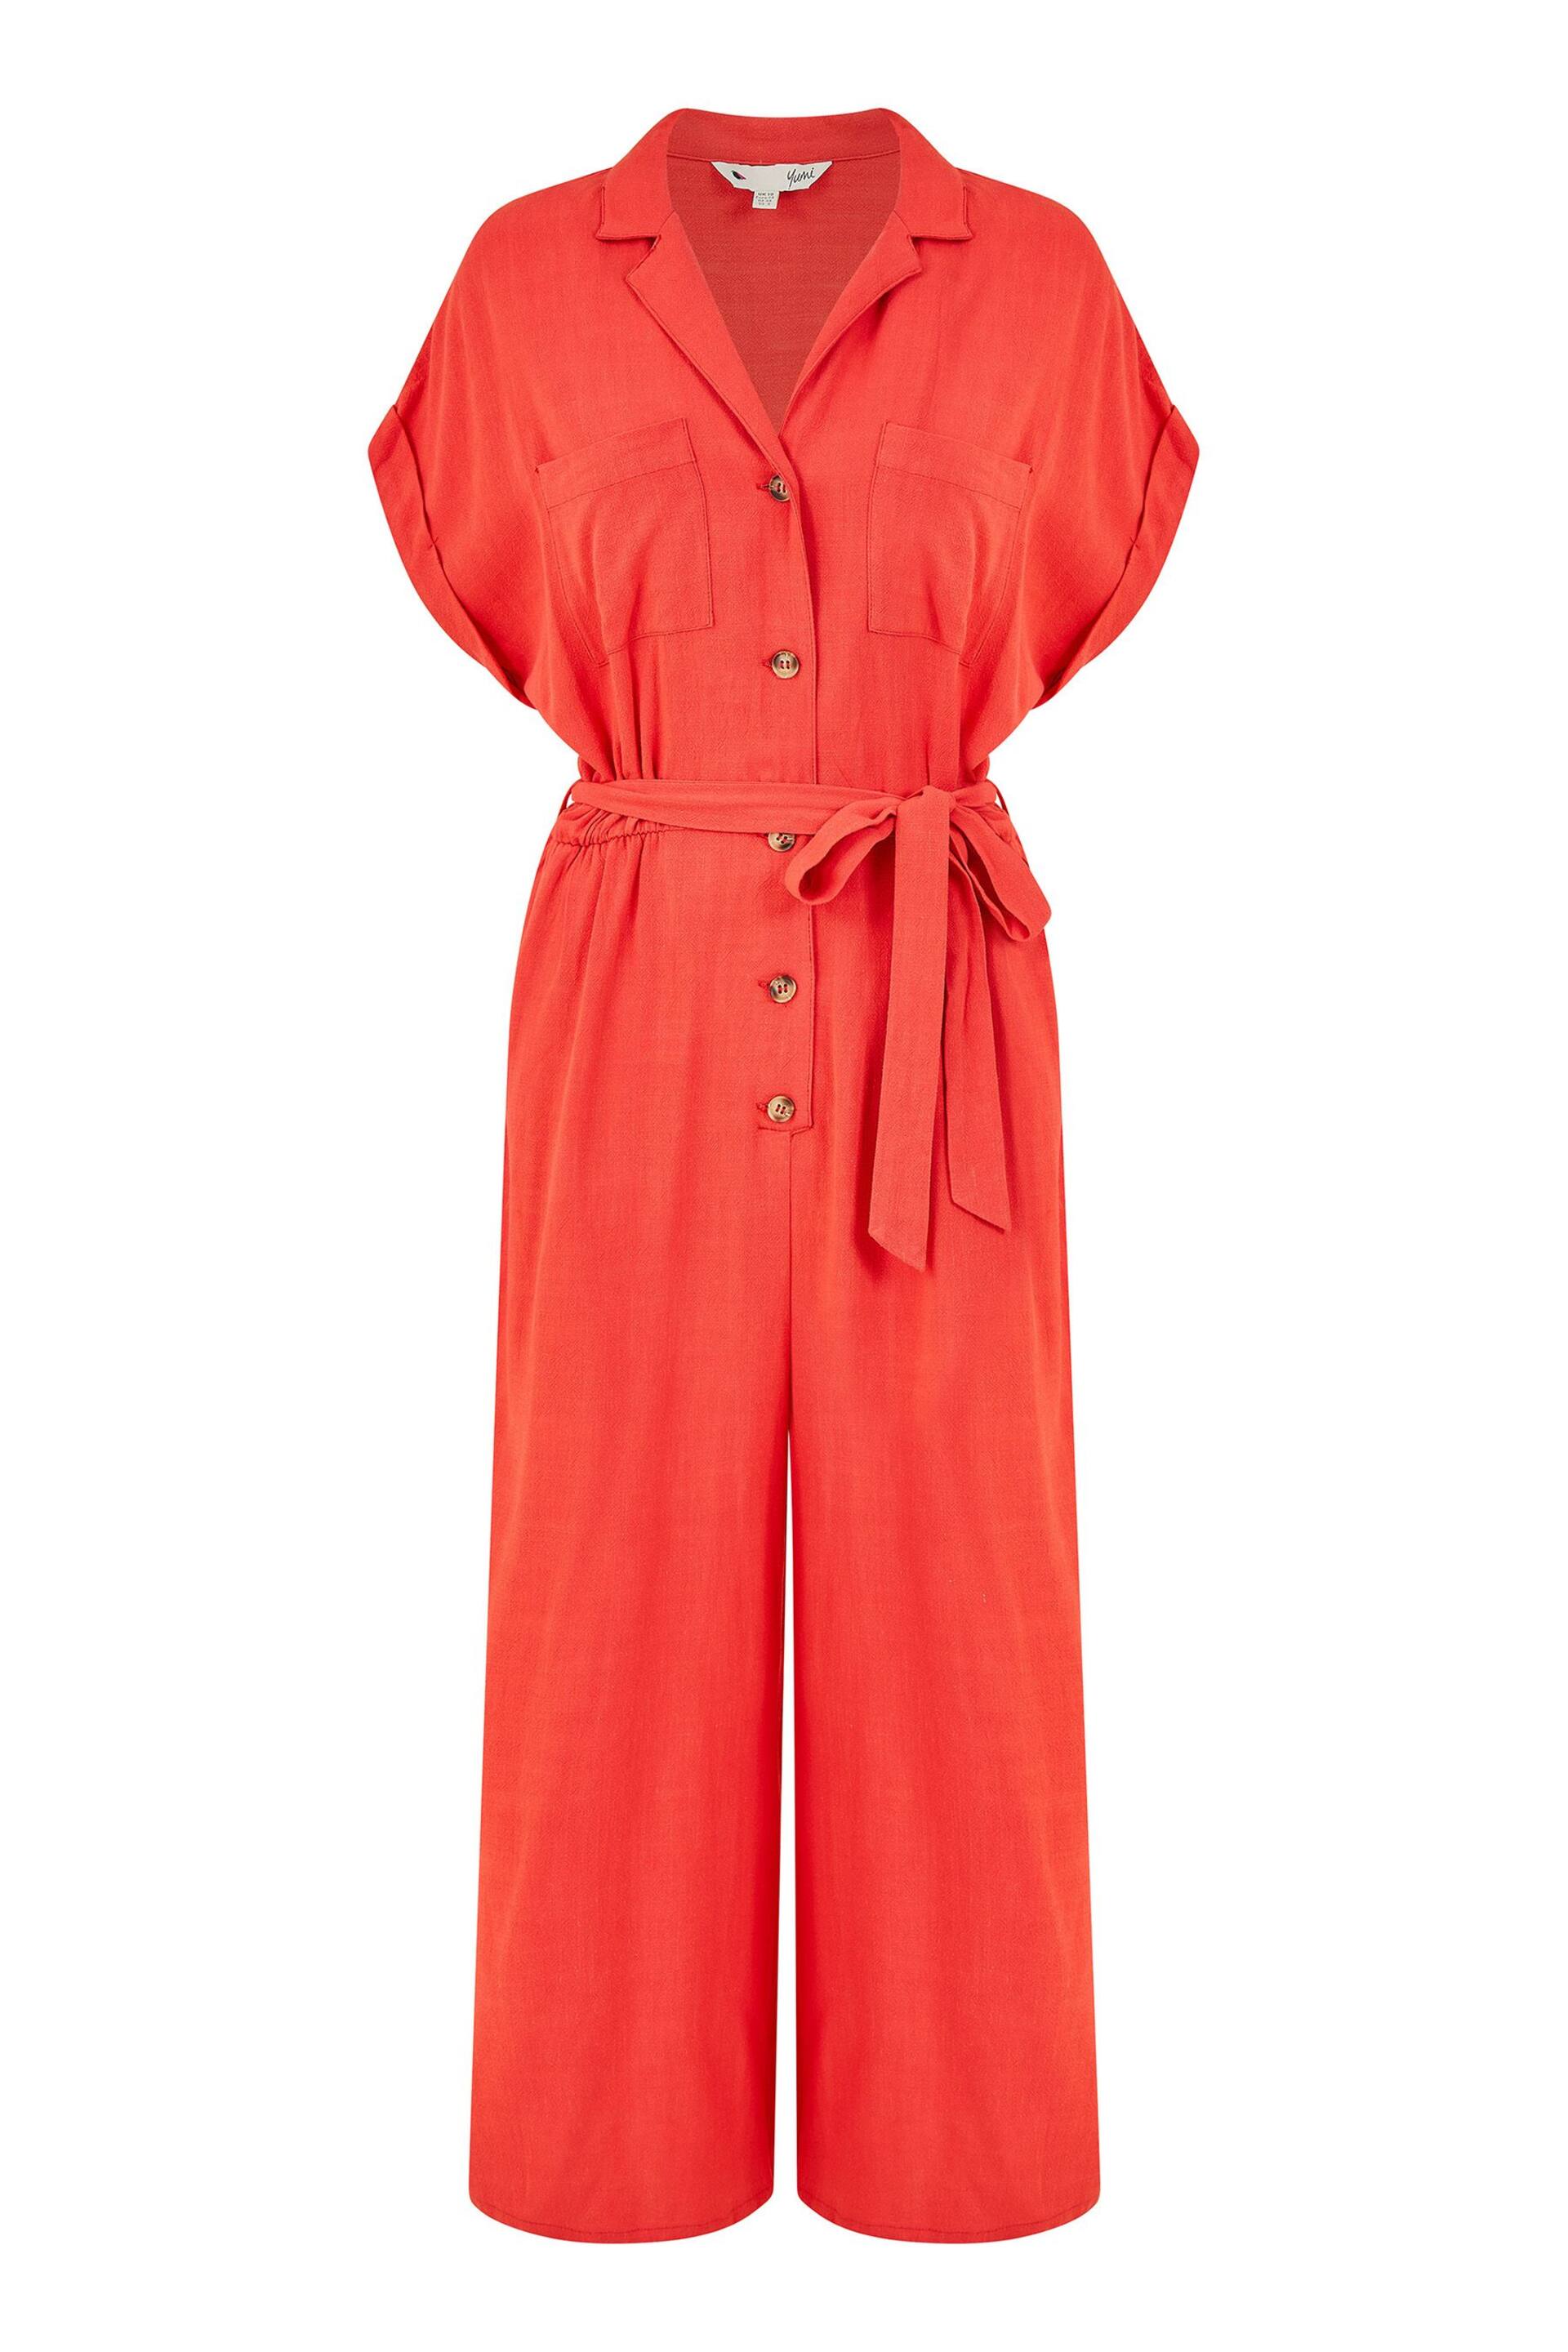 Yumi Red Button up Jumpsuit - Image 5 of 5